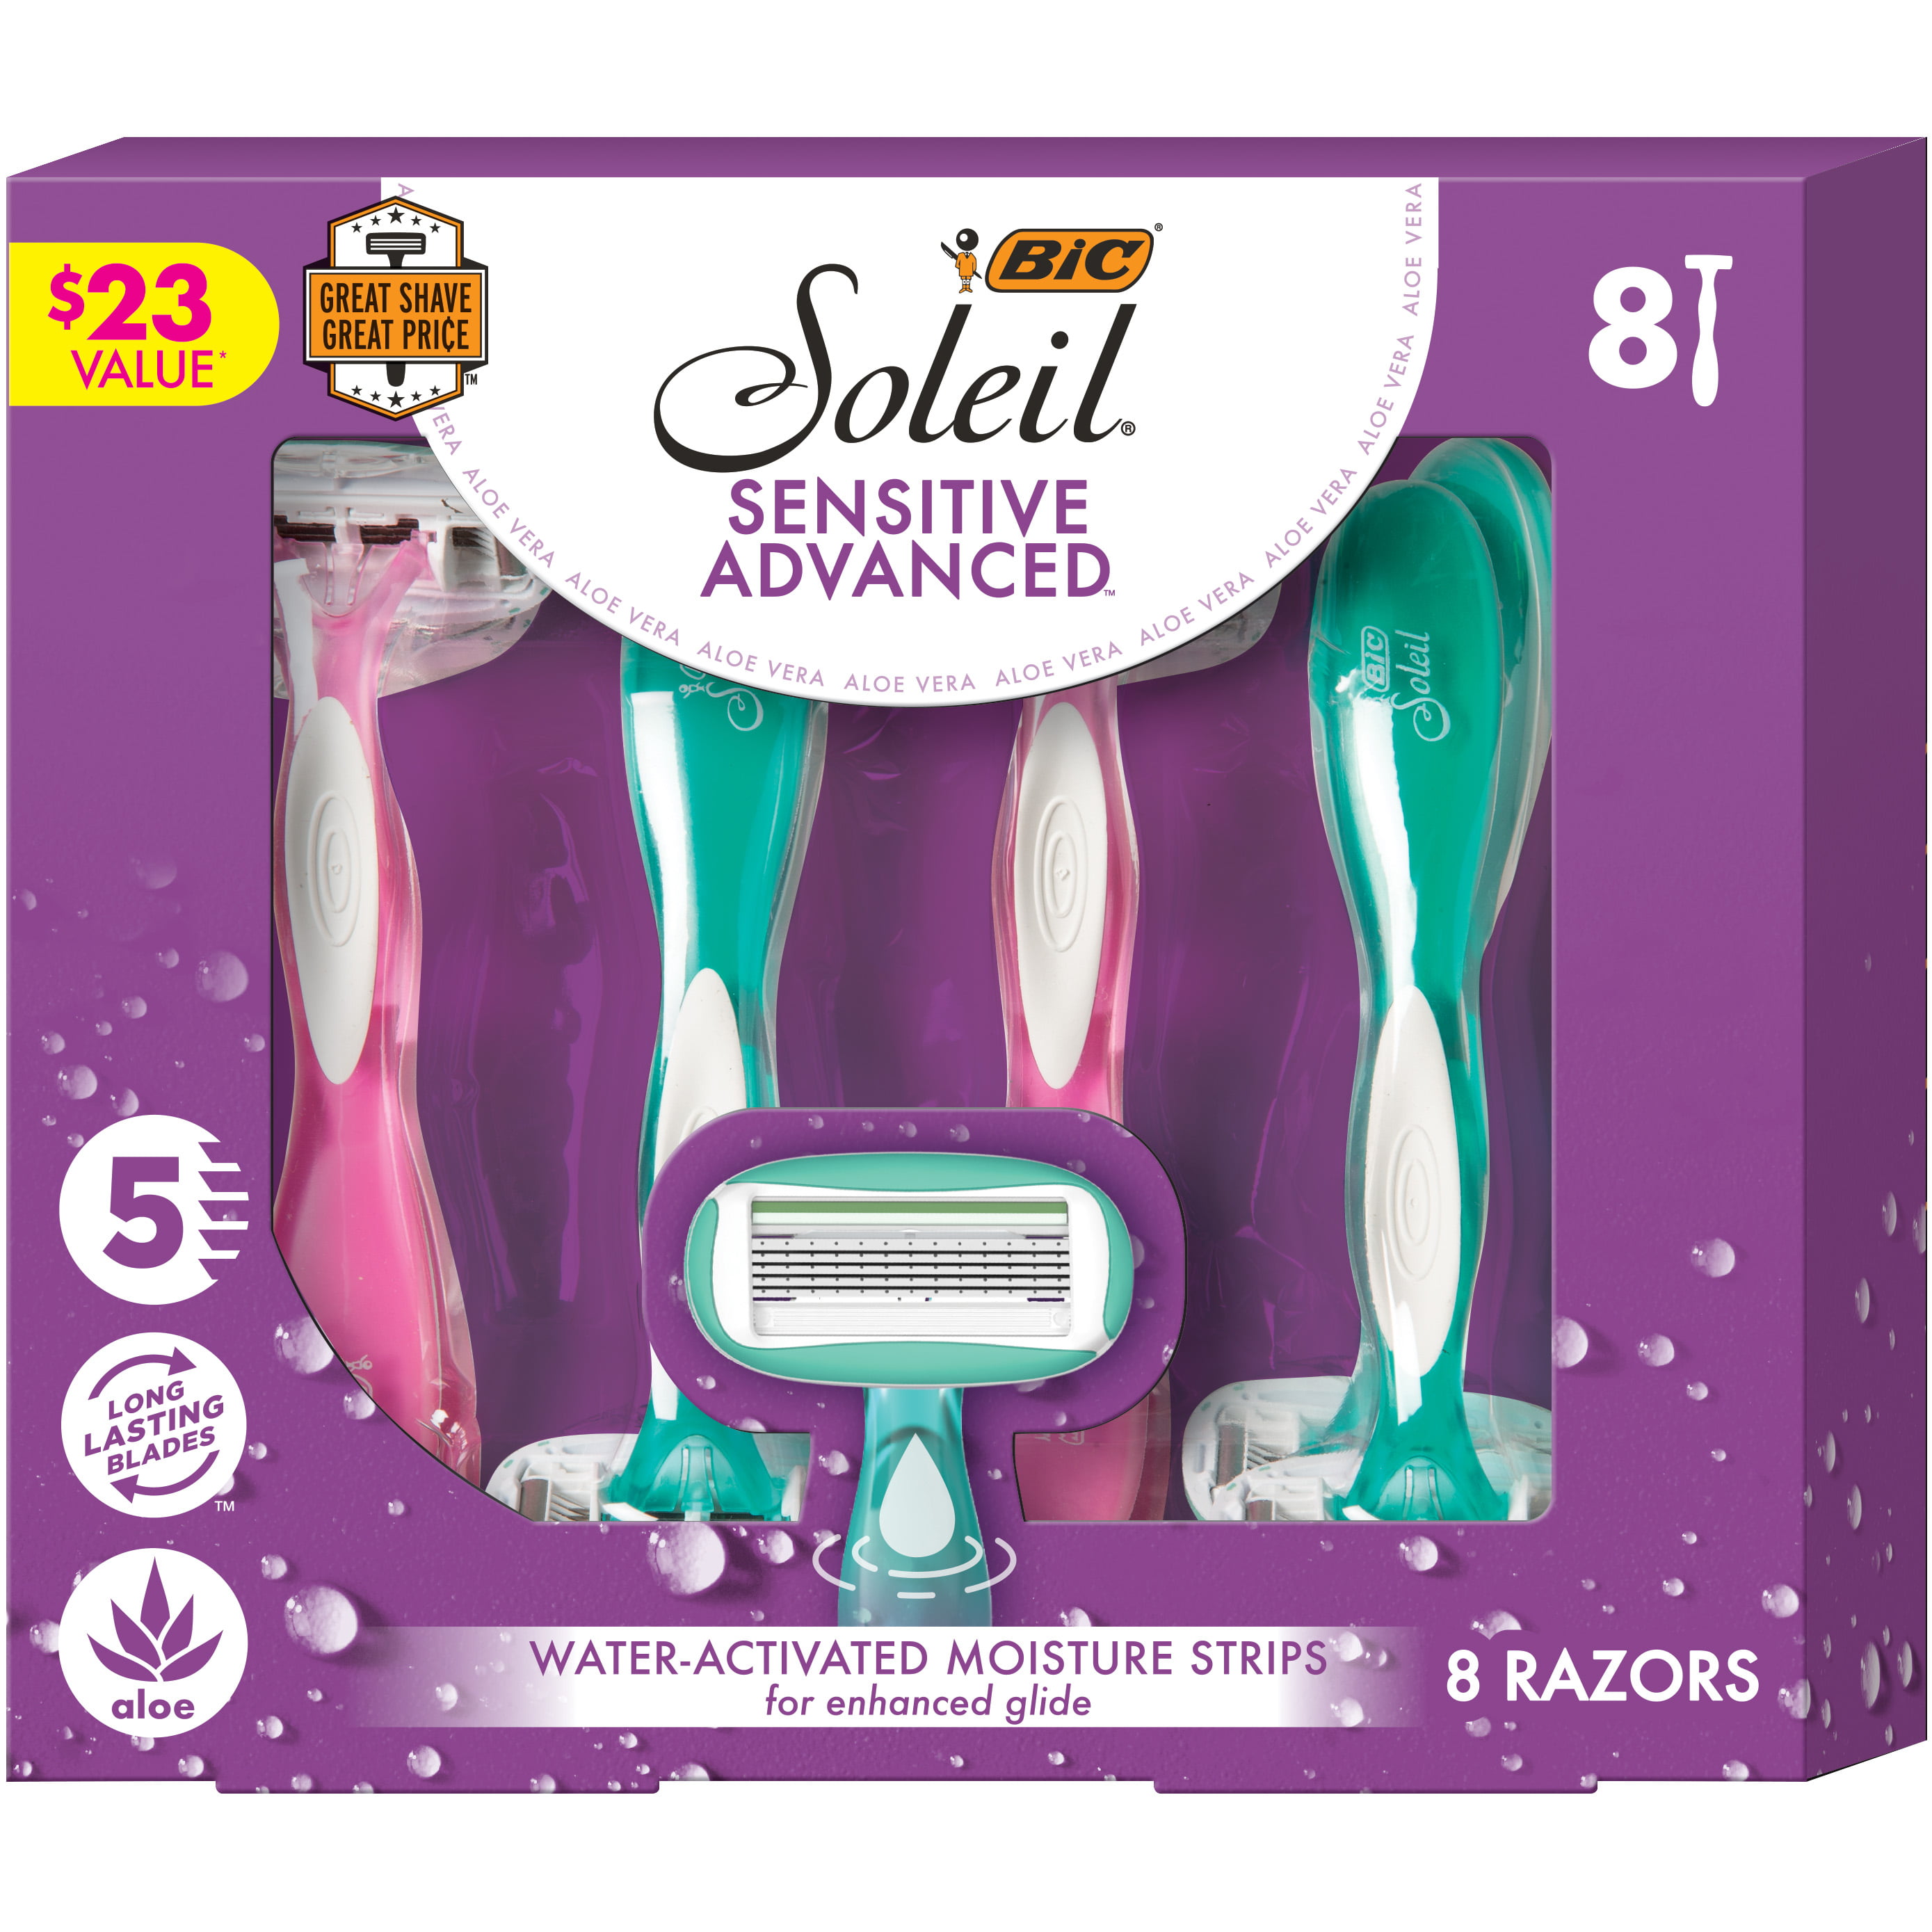 BIC Holiday Gift Set, Soleil Sensitive Advanced Women's Disposable Razors, 8-Pack, Smooth and Close Shave